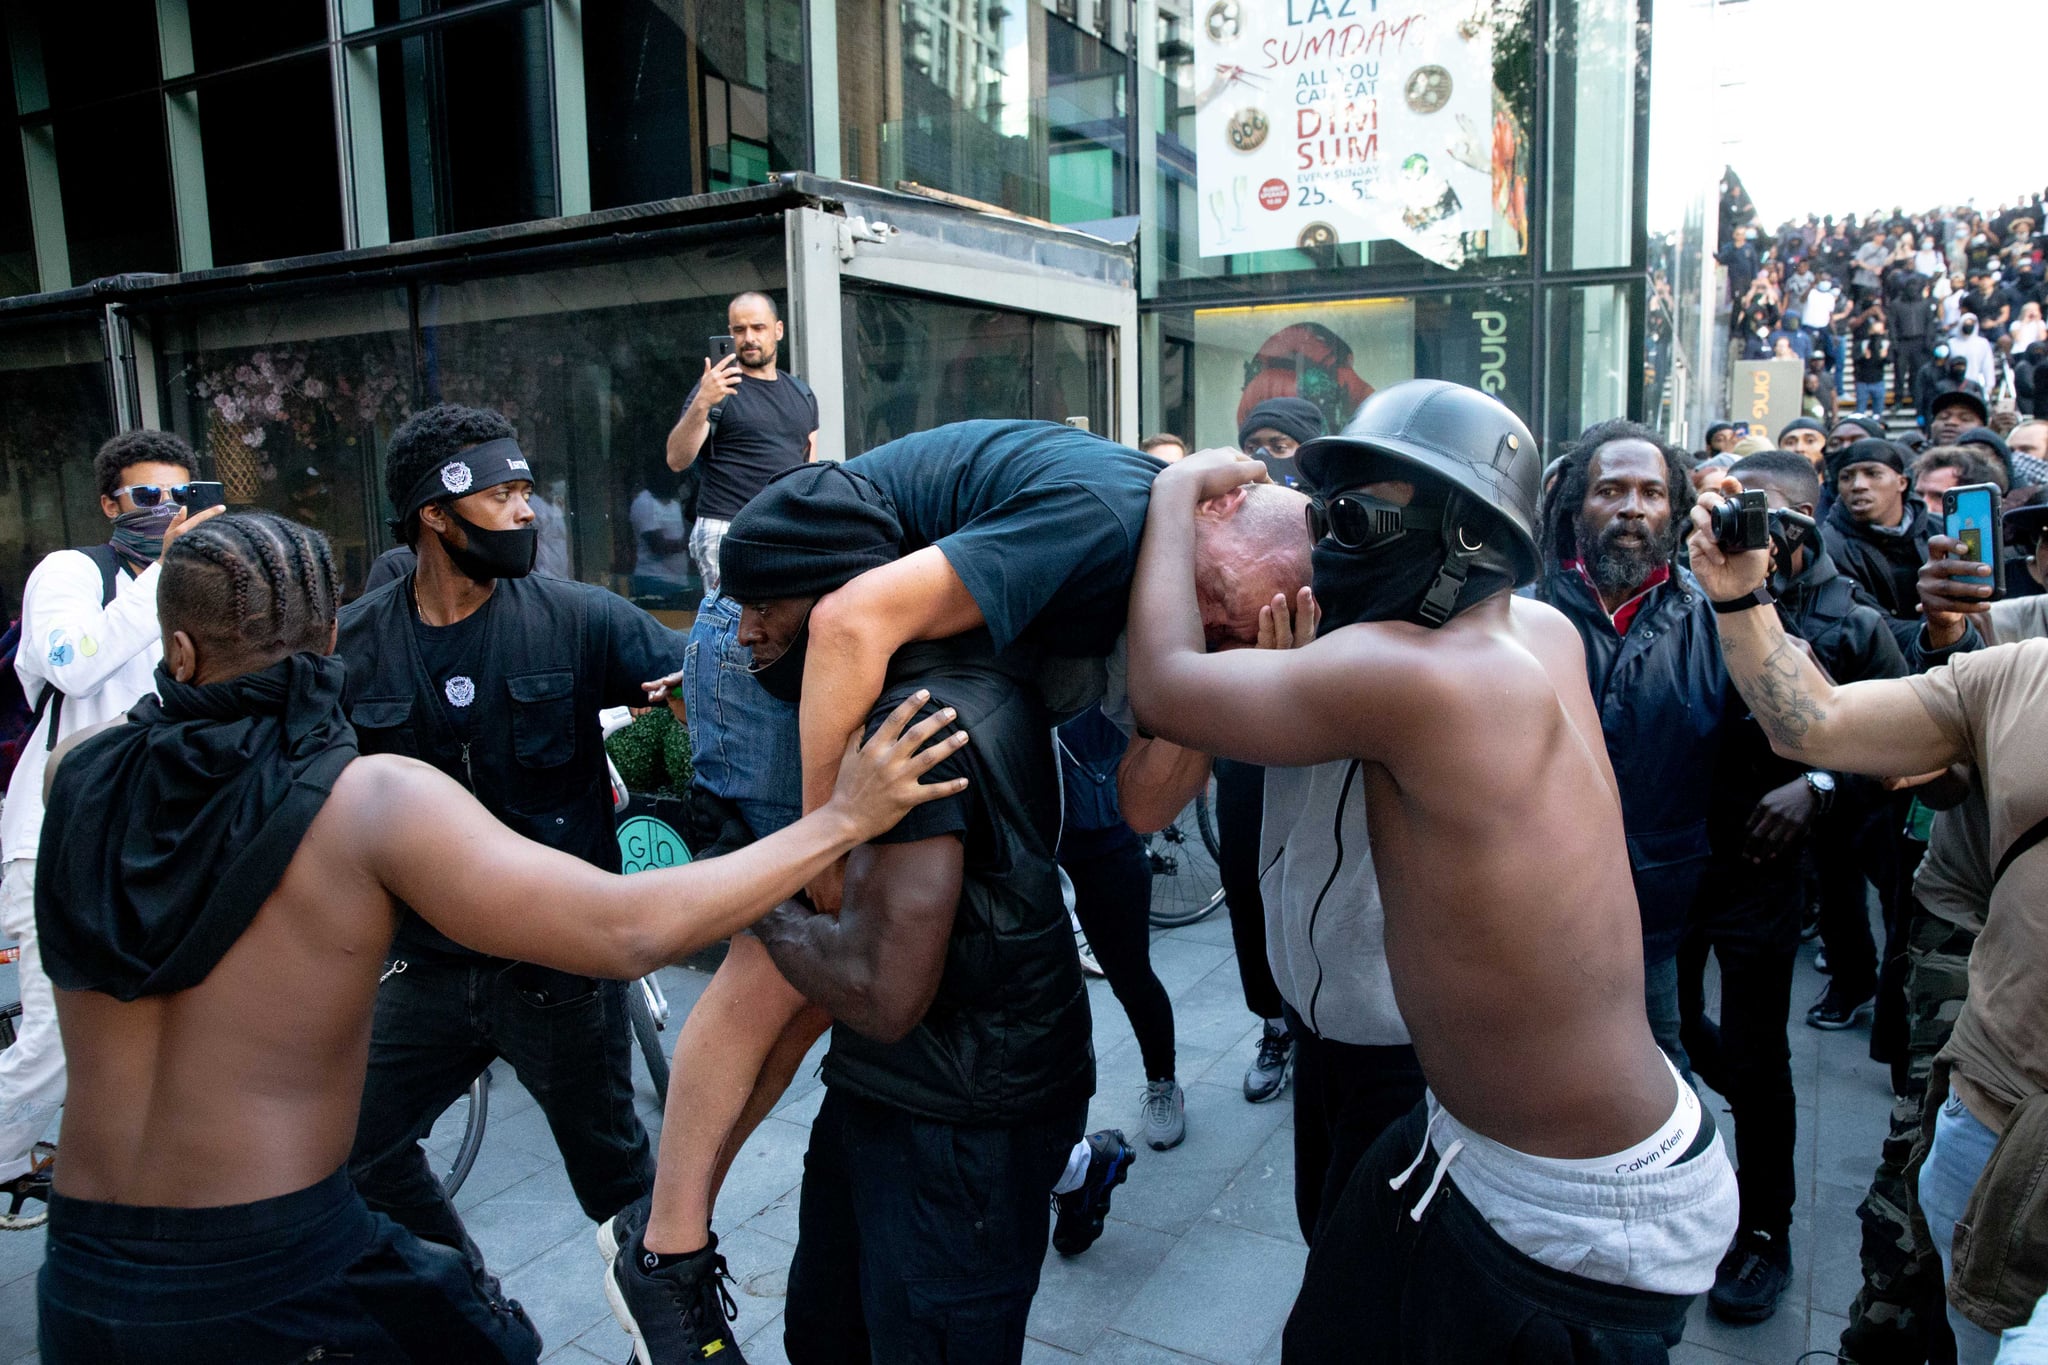 LONDON, UNITED KINGDOM - JUNE 13: A group of men including Patrick Hutchinson (carrying the man) help an injured man away after he was allegedly attacked by some of the crowd of protesters on the Southbank near Waterloo station on June 13, 2020 in London, United Kingdom. Following a social media post by the far-right activist known as Tommy Robinson, members of far-right linked groups have gathered around statues in London. Several statues in the UK have been targeted by Black Lives Matter protesters for their links to racism and the slave trade. (Photo by Luke Dray/Getty Images)